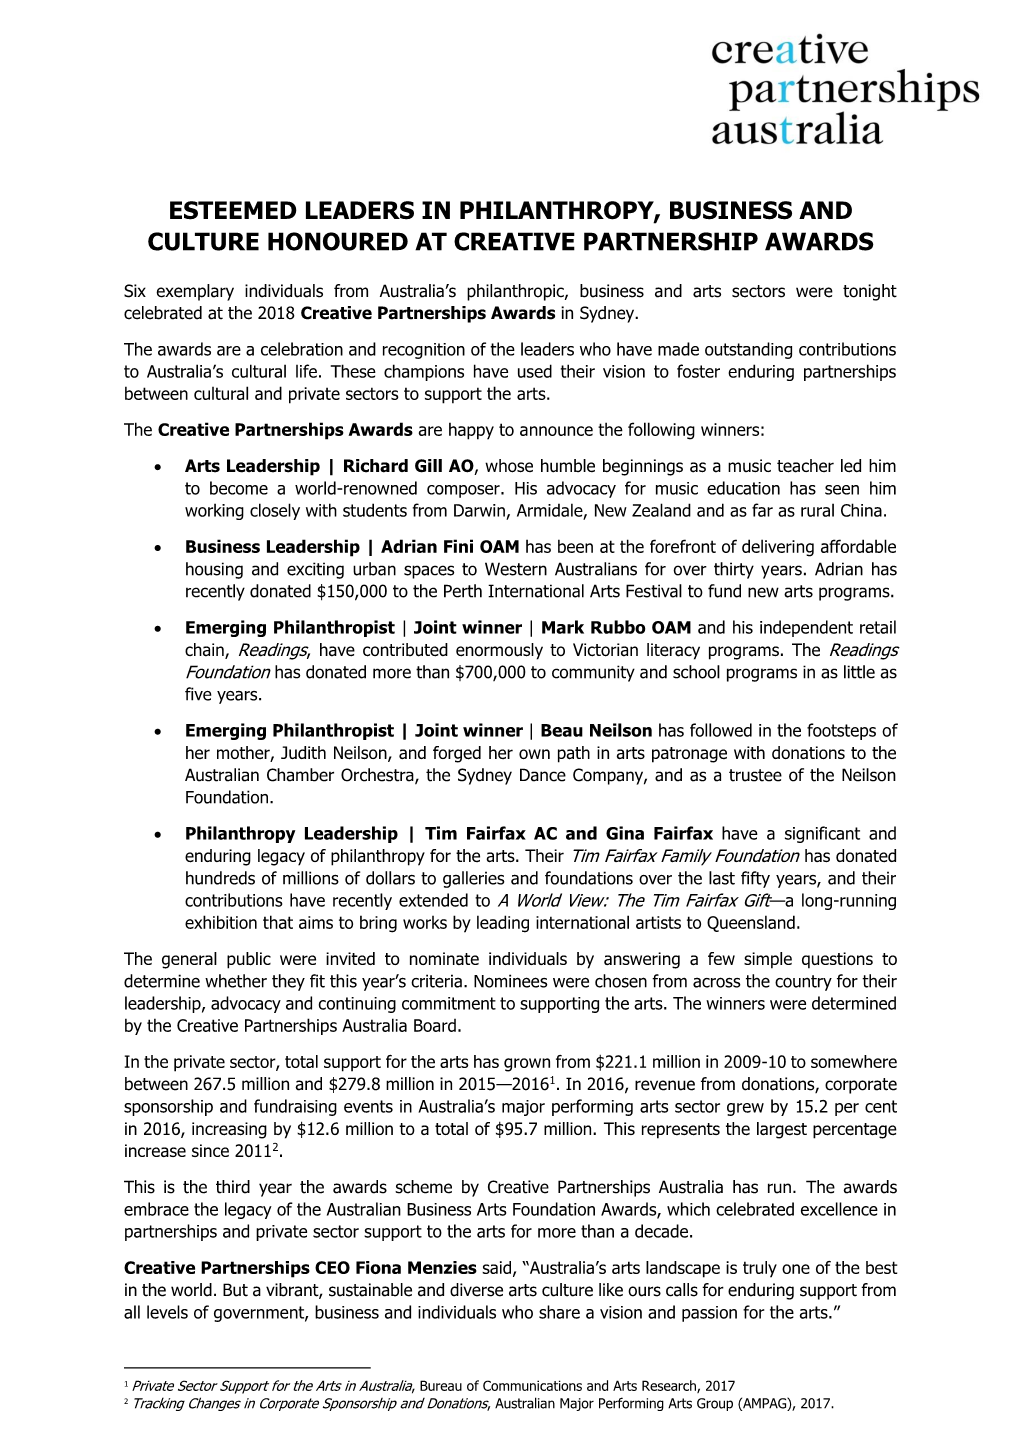 Esteemed Leaders in Philanthropy, Business and Culture Honoured at Creative Partnership Awards